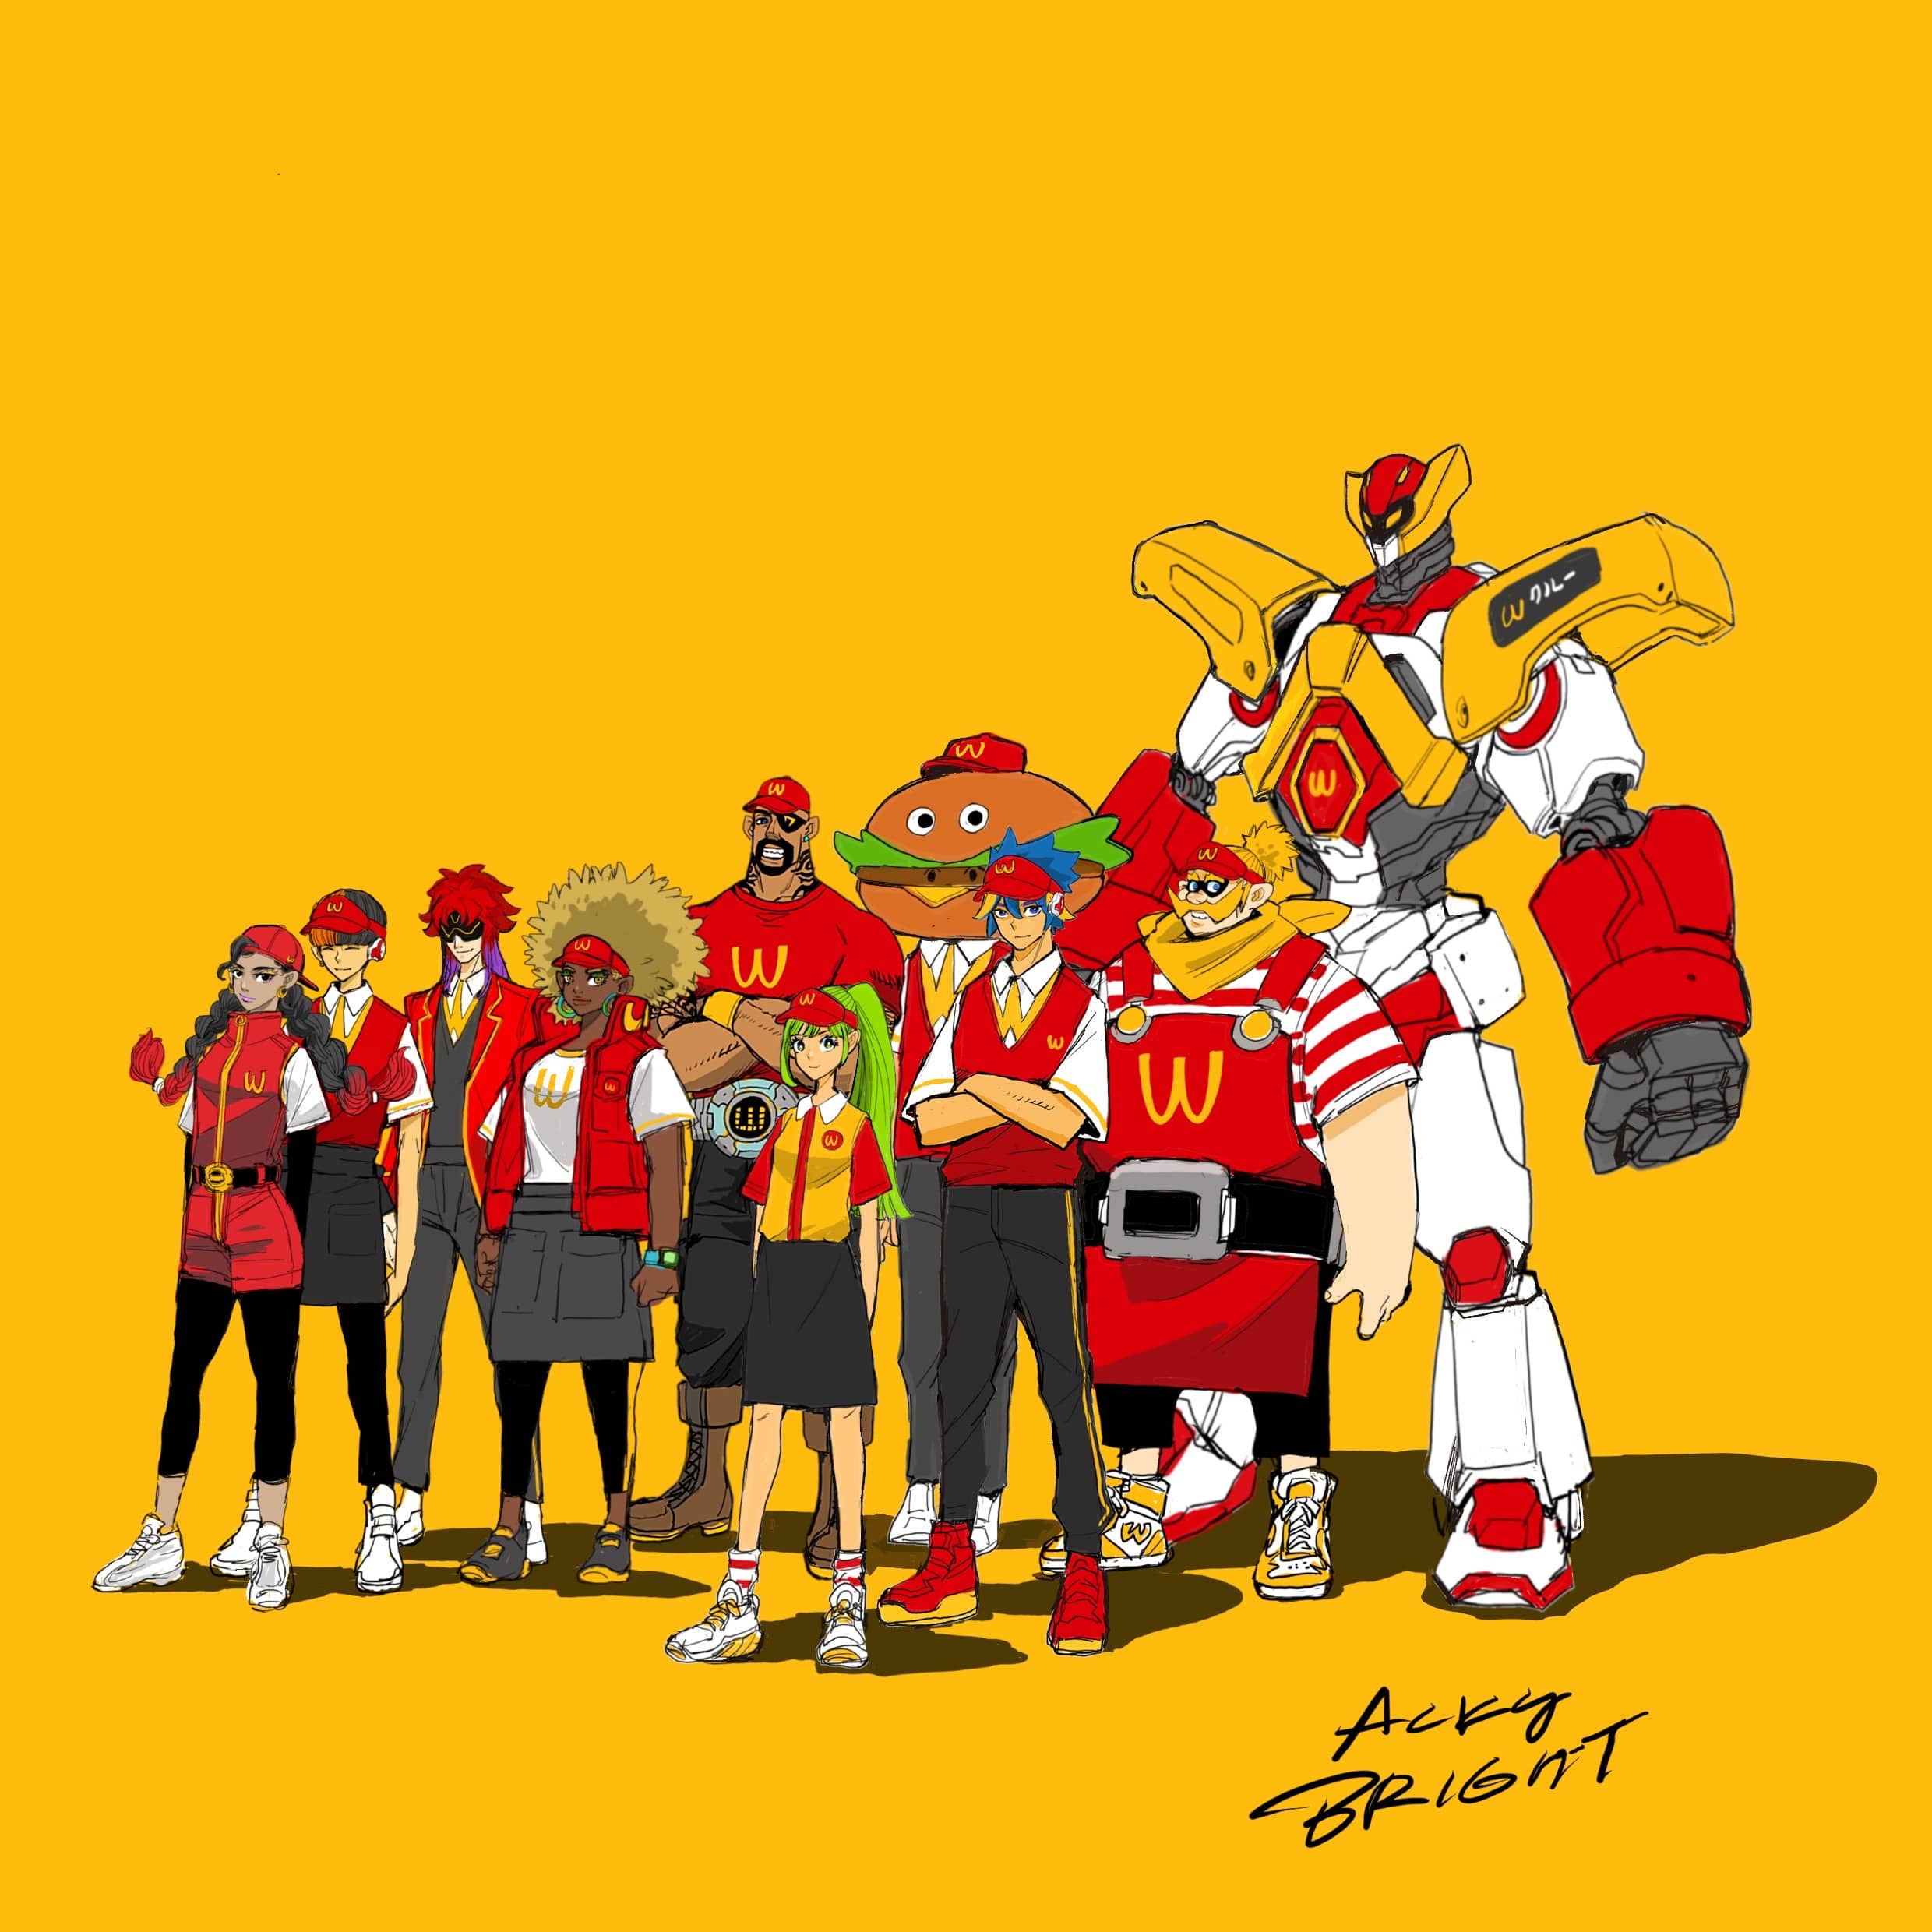 lineup of characters illustrated and designed by Acky Bright for the WcDonald's campaign (left to right): Mia, Carm, J, Flurry, Mr.Bev, Wicke, Burg, Midnight, Quart Sr, and the WcDizer 3000.